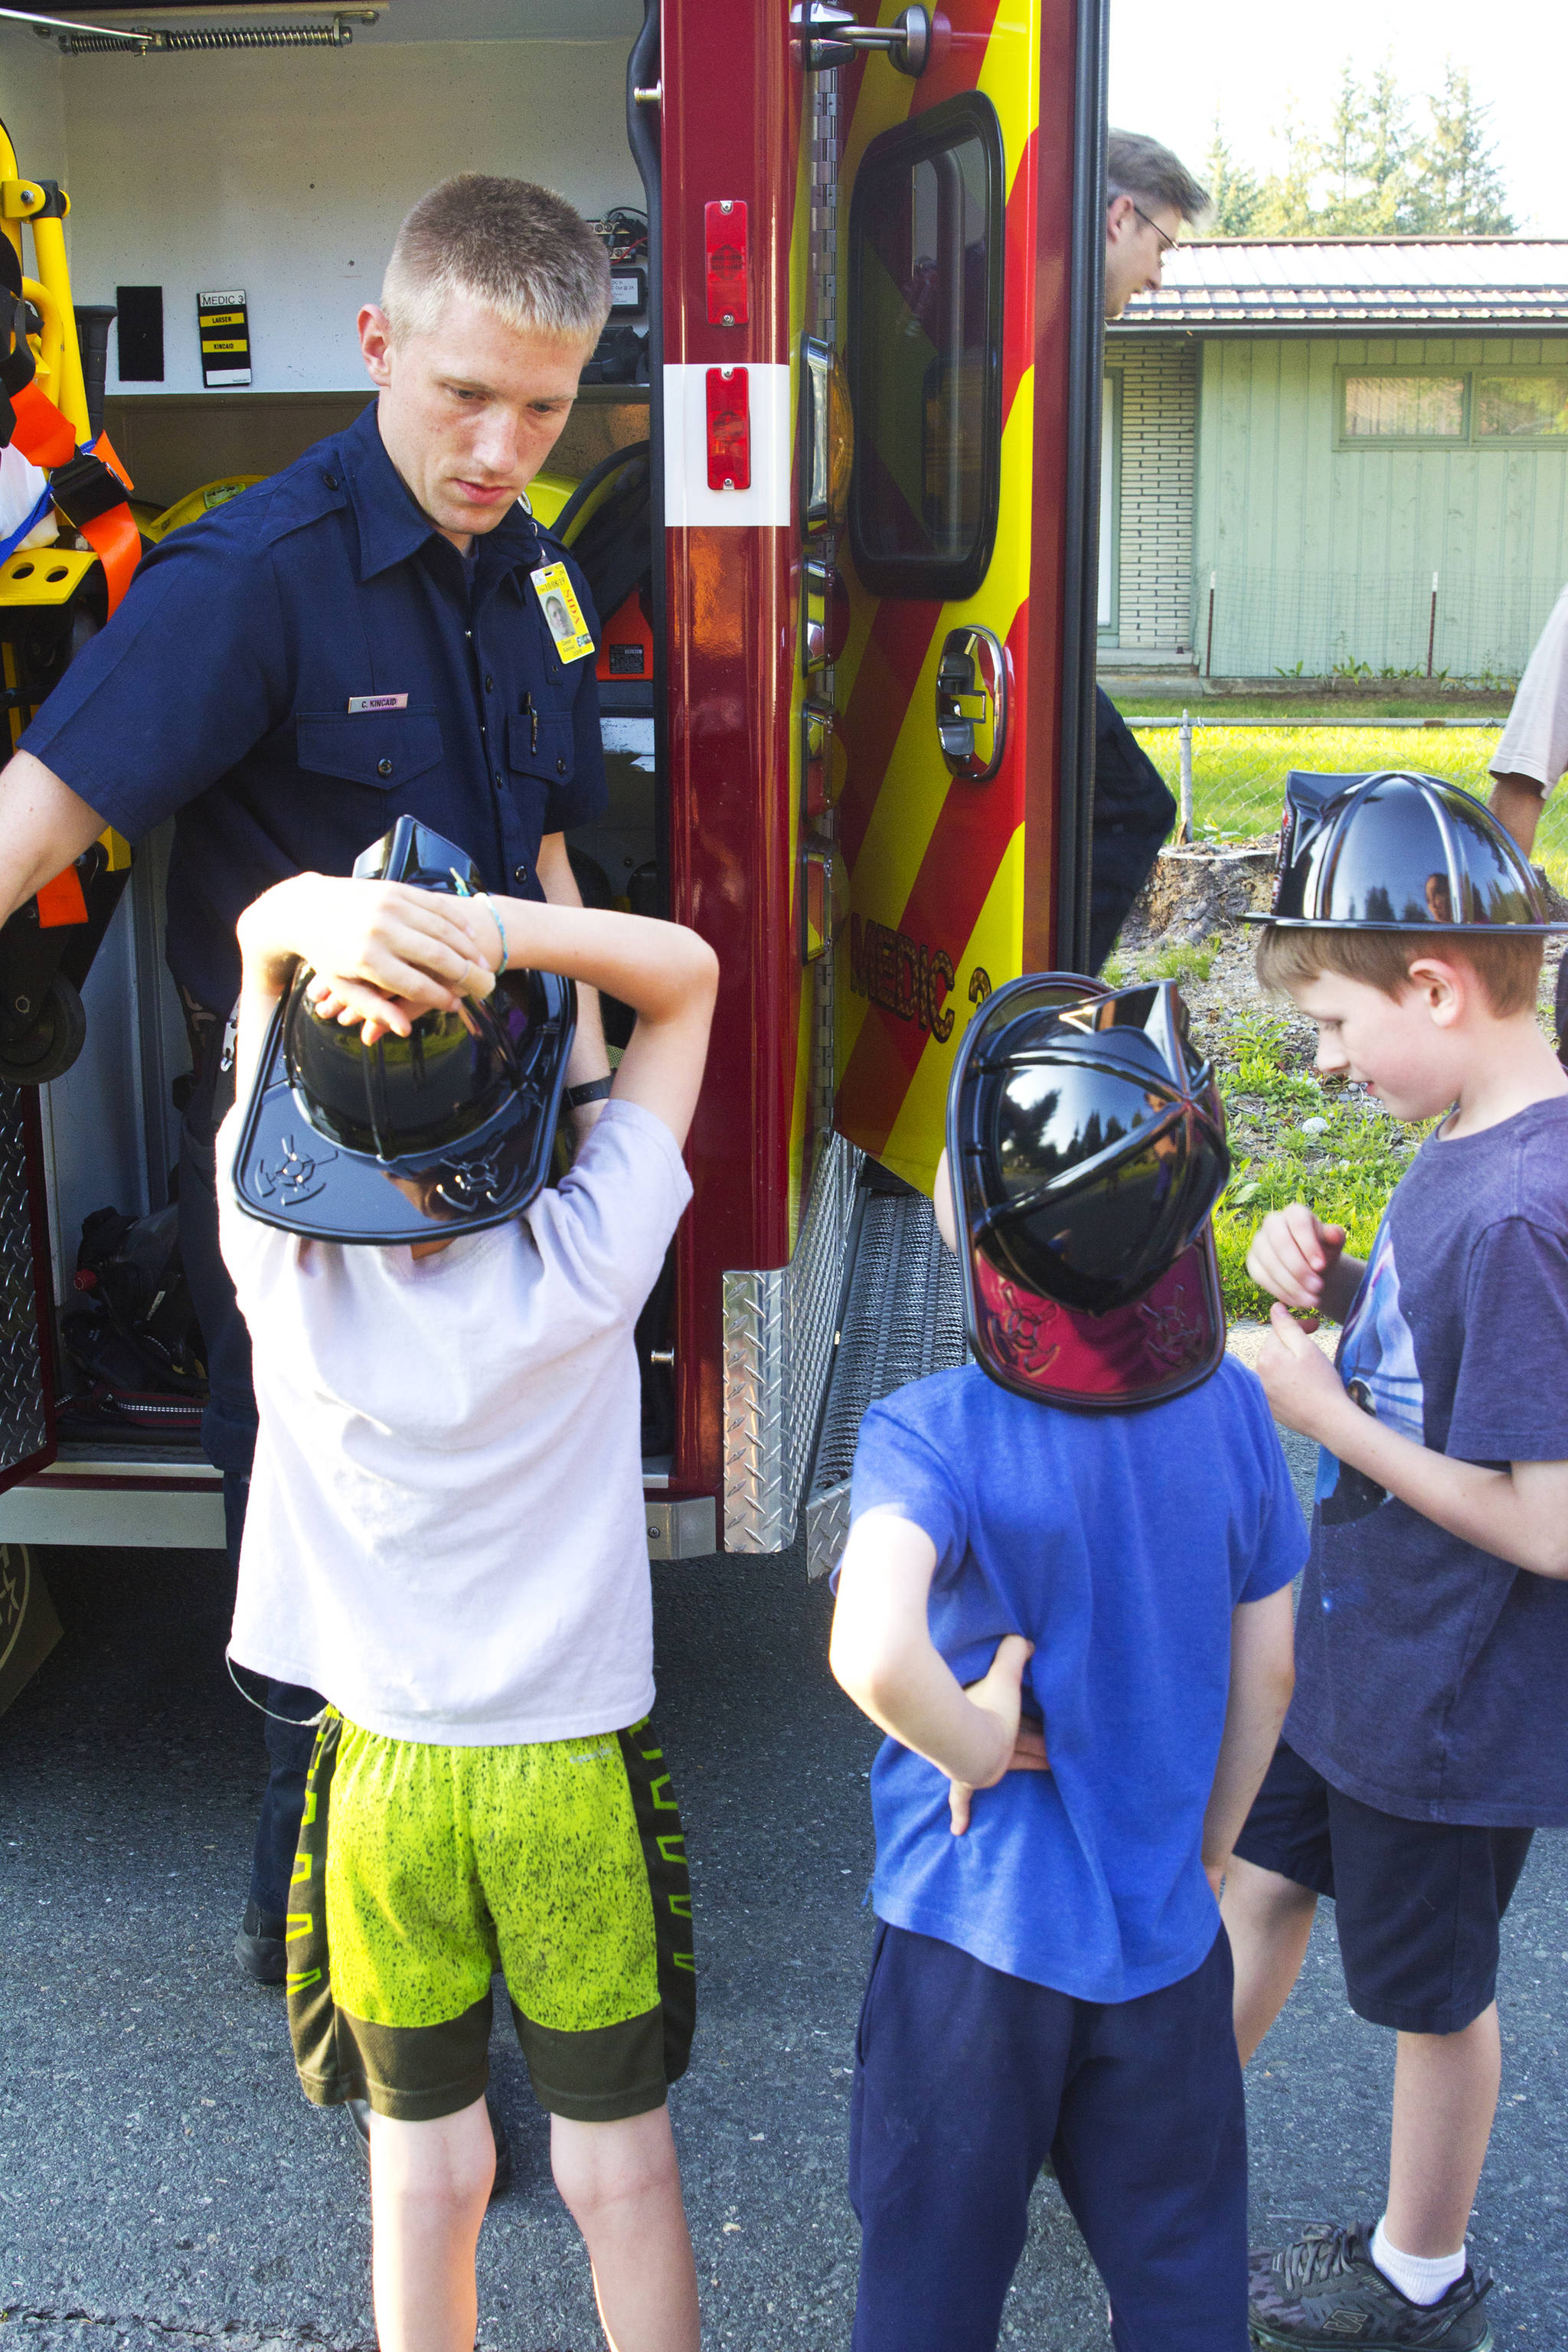 Conor Kincaid, firefighter/EMT with Capital City Fire/Rescue, explains his job to some local children during the National Night Out, Aug. 6, 2019. (Michael S. Lockett | Juneau Empire)